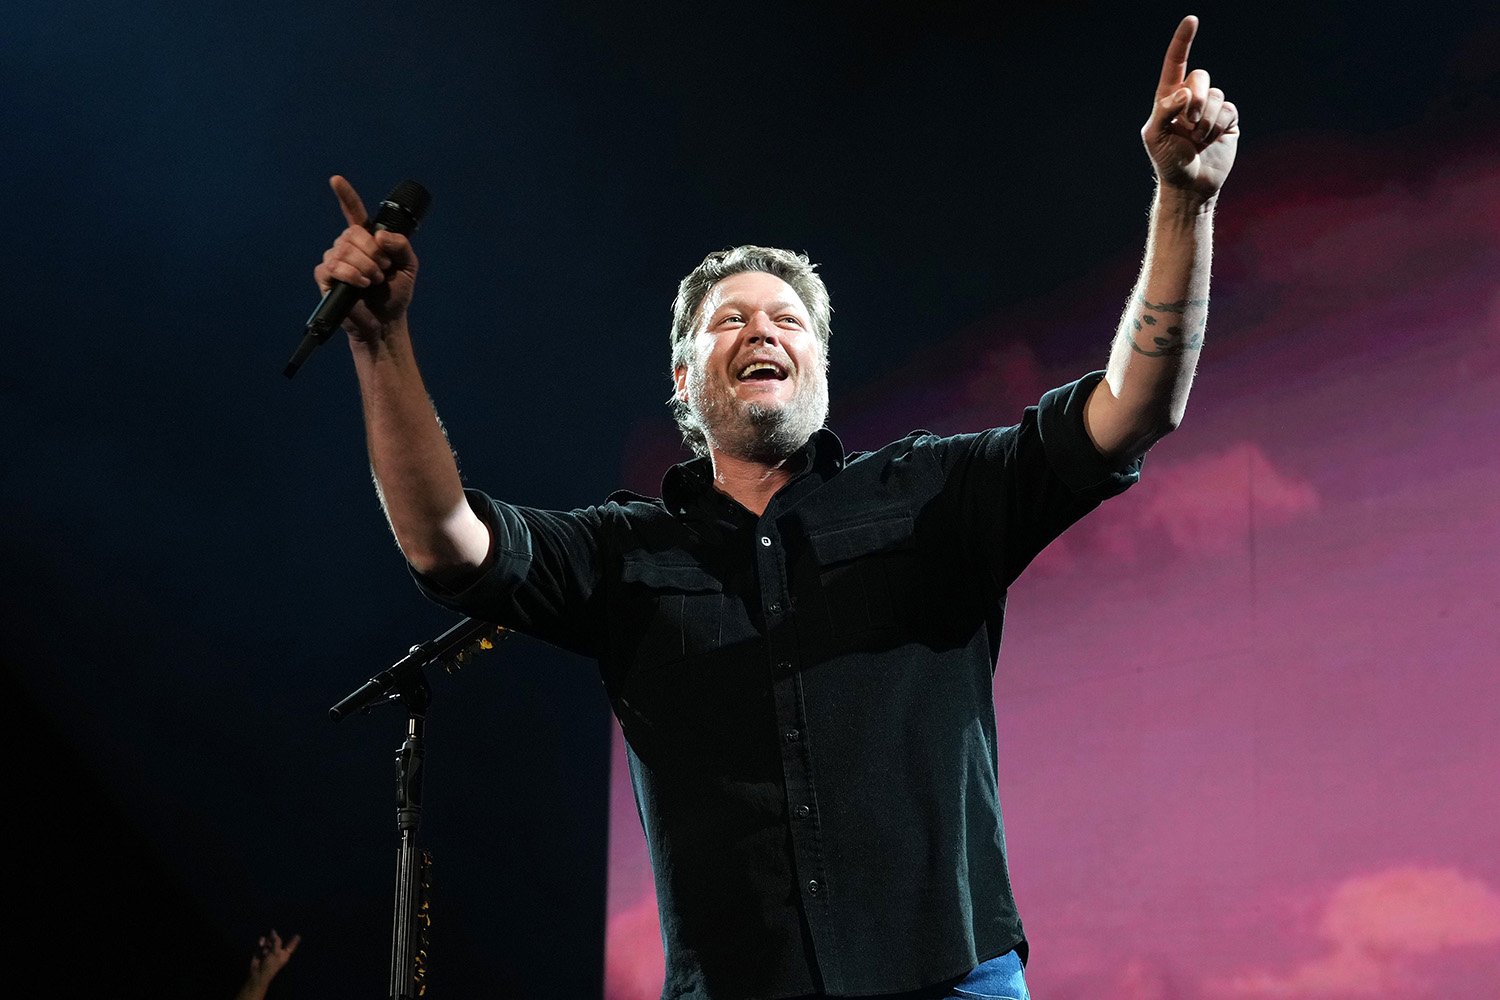 The Voice coach Blake Shelton, who recently spoke about his retirement